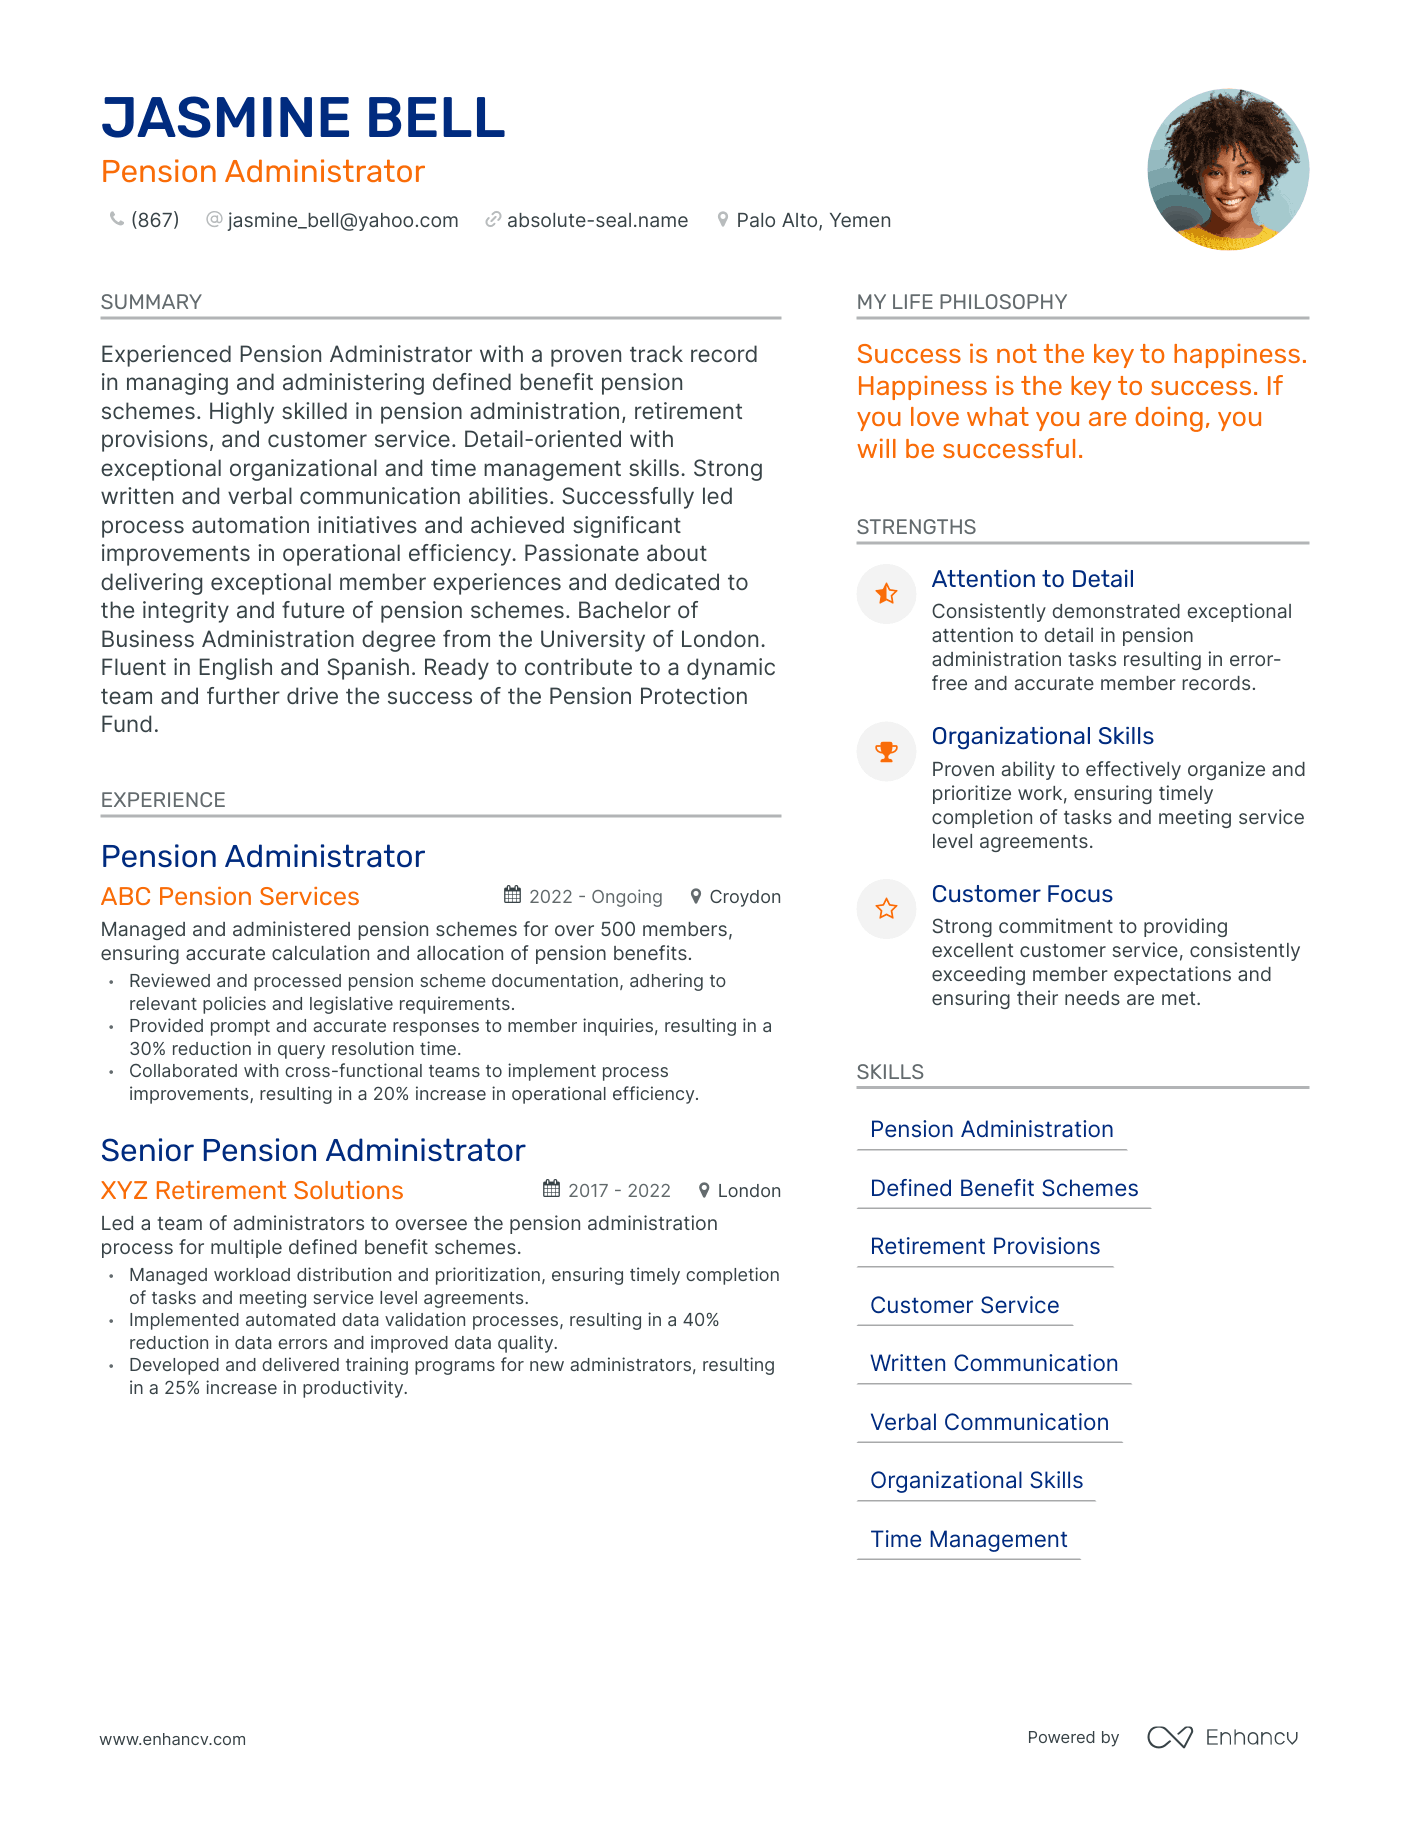 Pension Administrator resume example